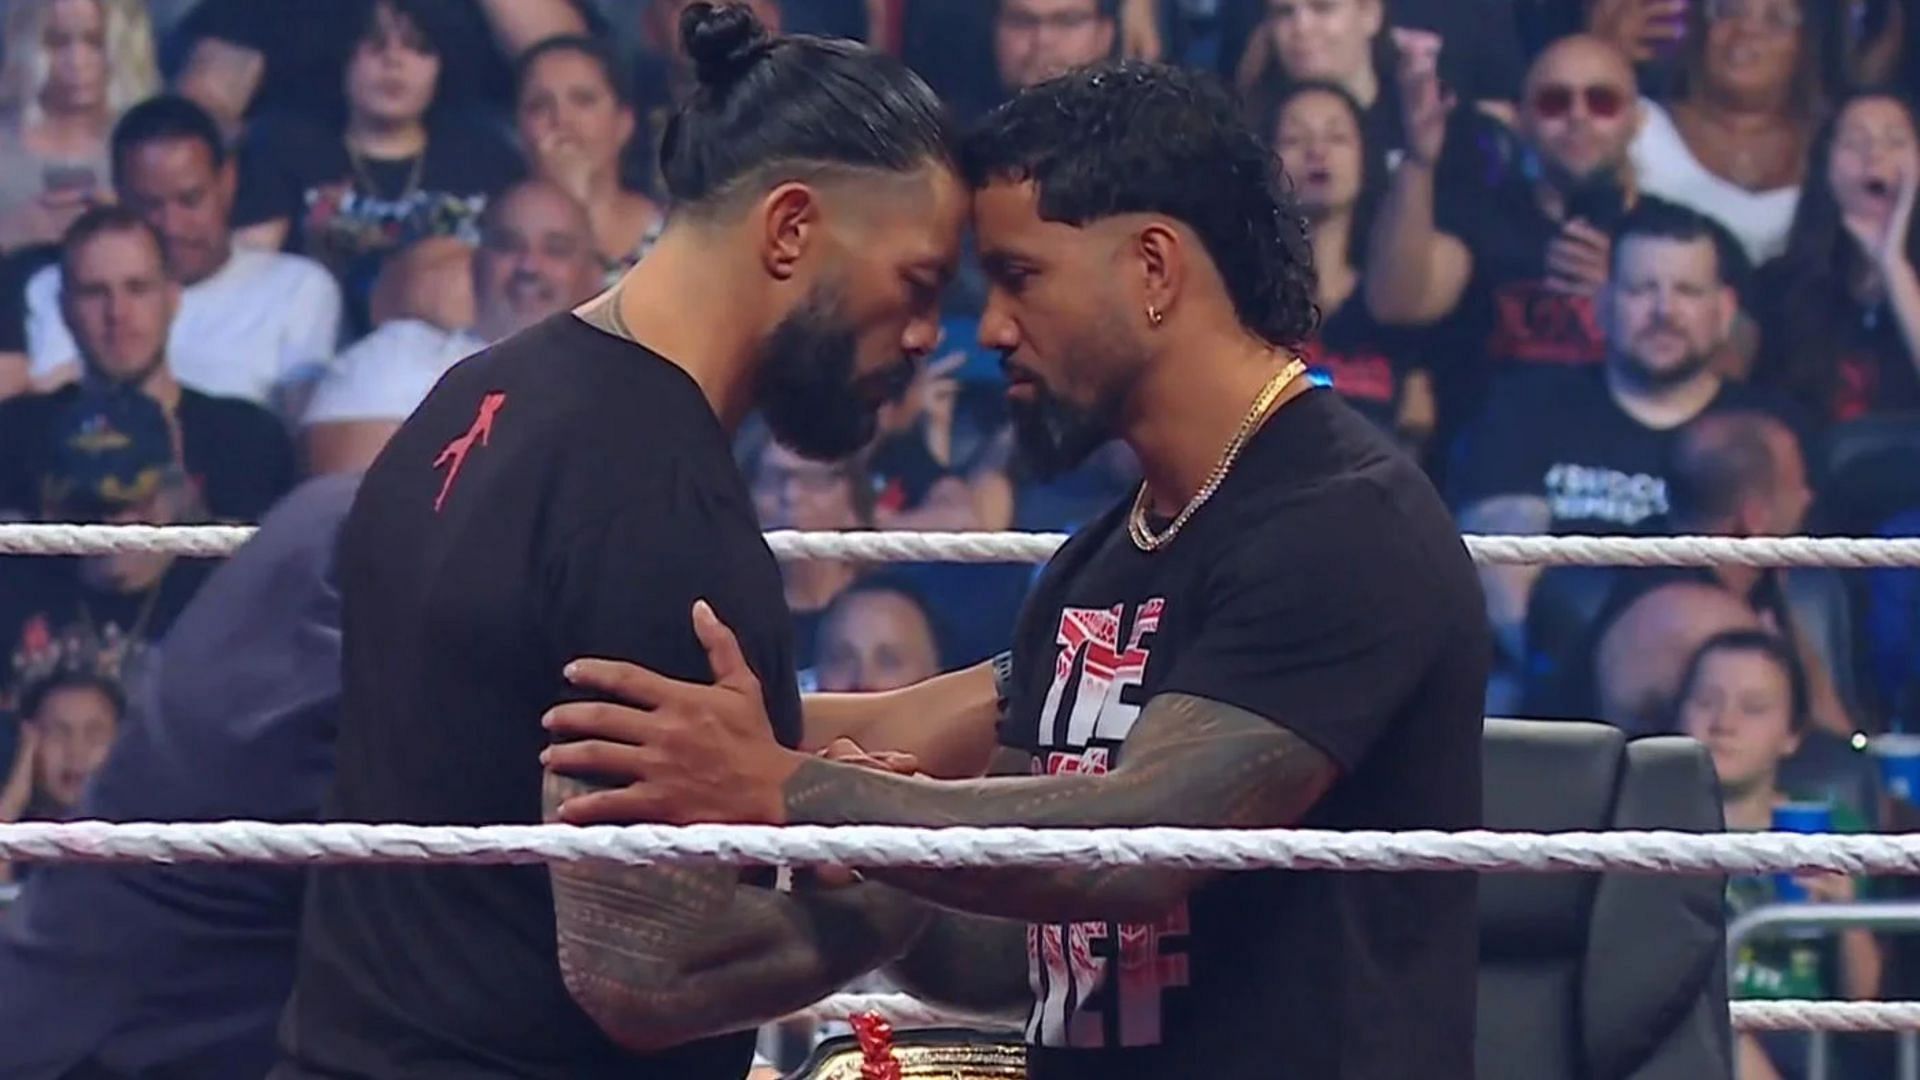 Roman Reigns vs. Jey Uso at SummerSlam could result in a significant